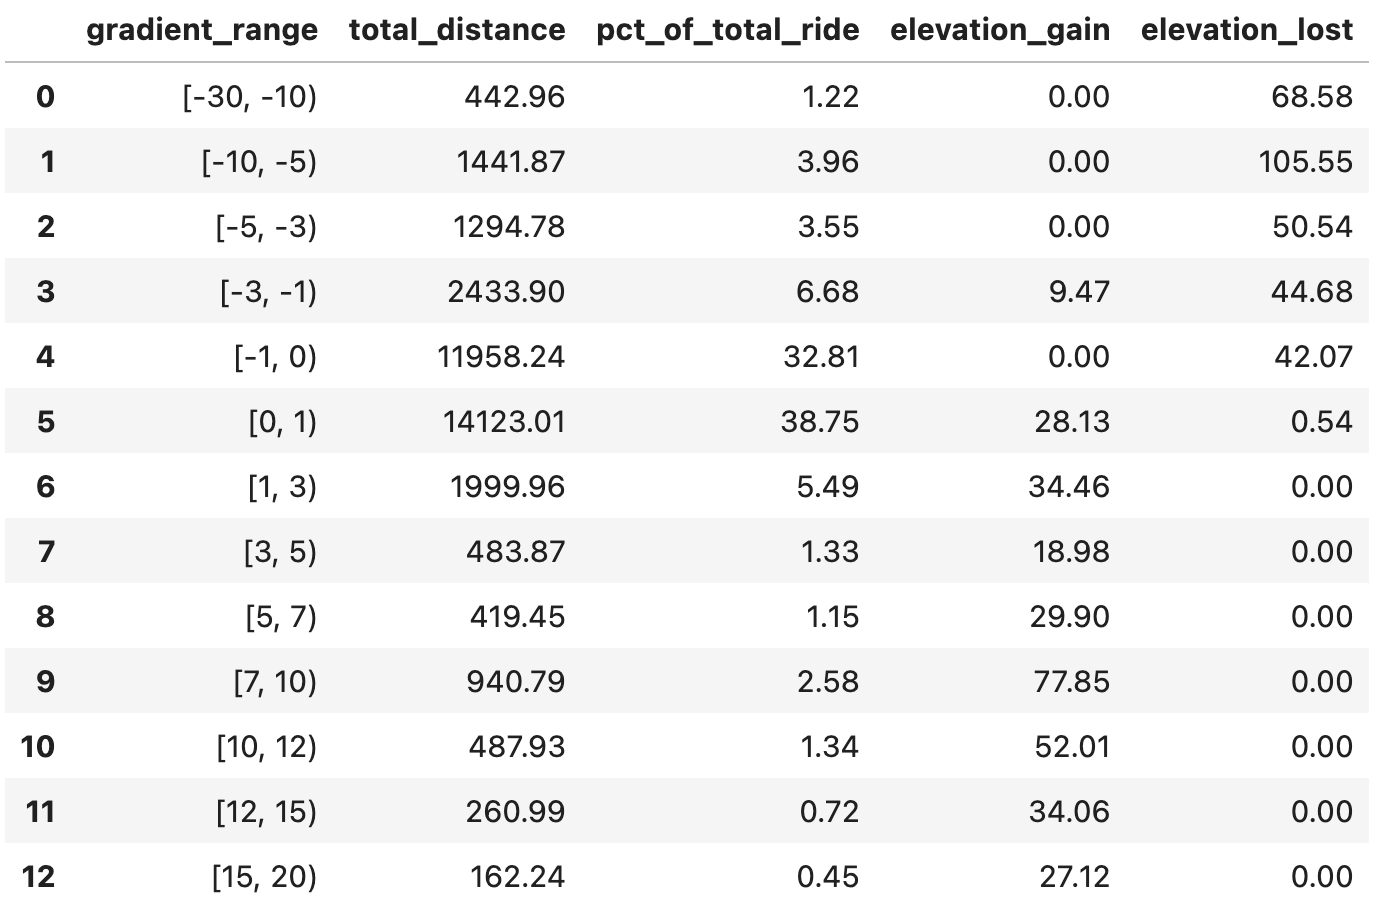 Image 5 - Statistics for each gradient range (image by author)